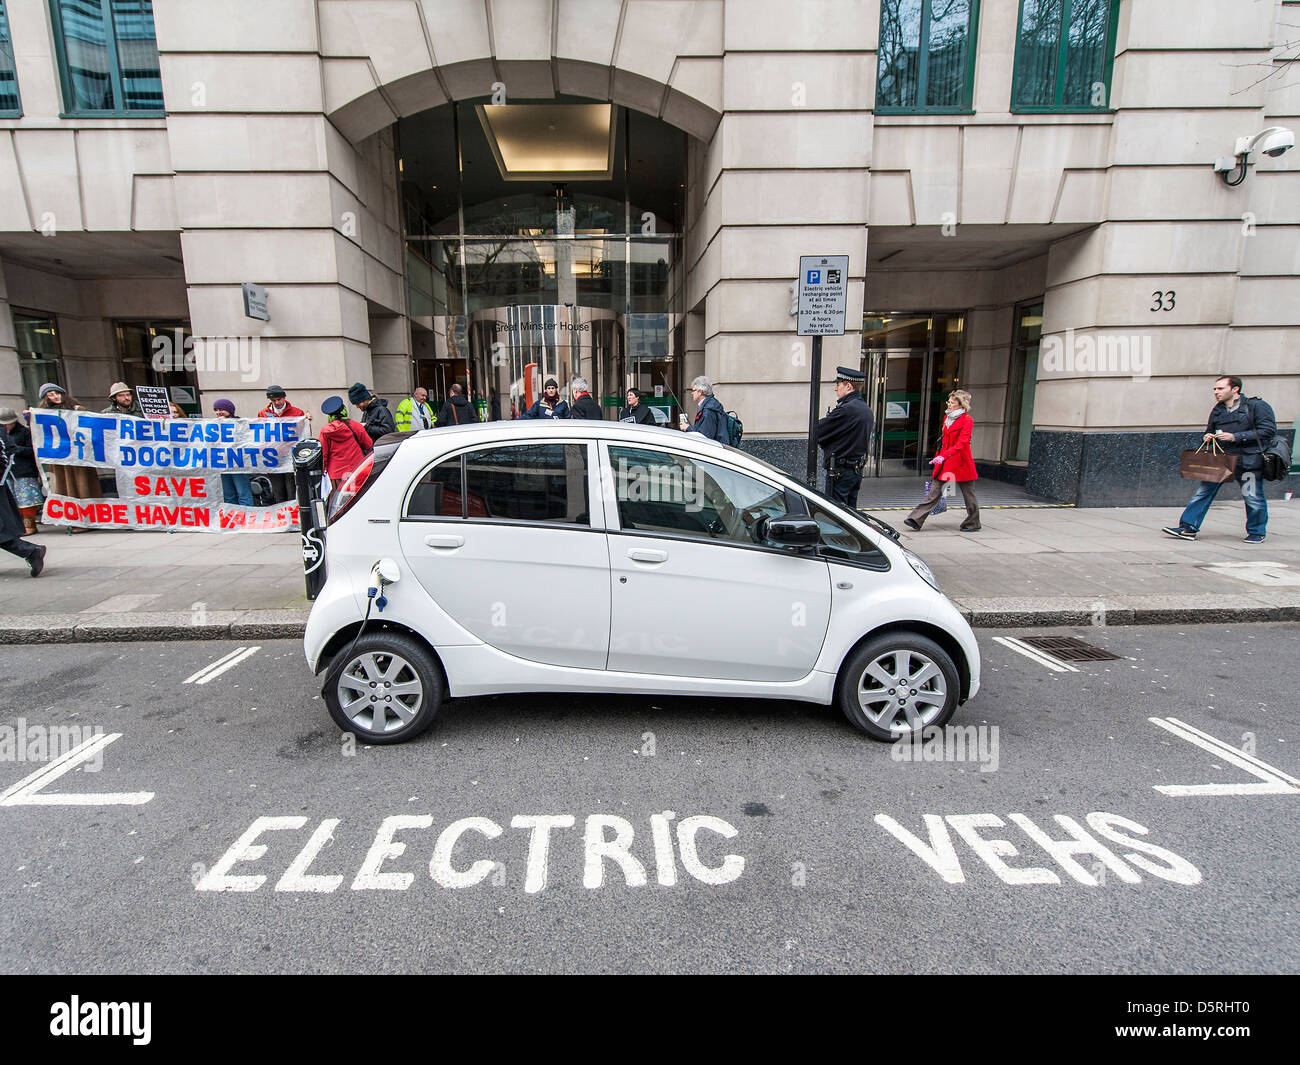 An electric car is charged outside the Department for Transport.  An anti road protest goes on in the background. Stock Photo